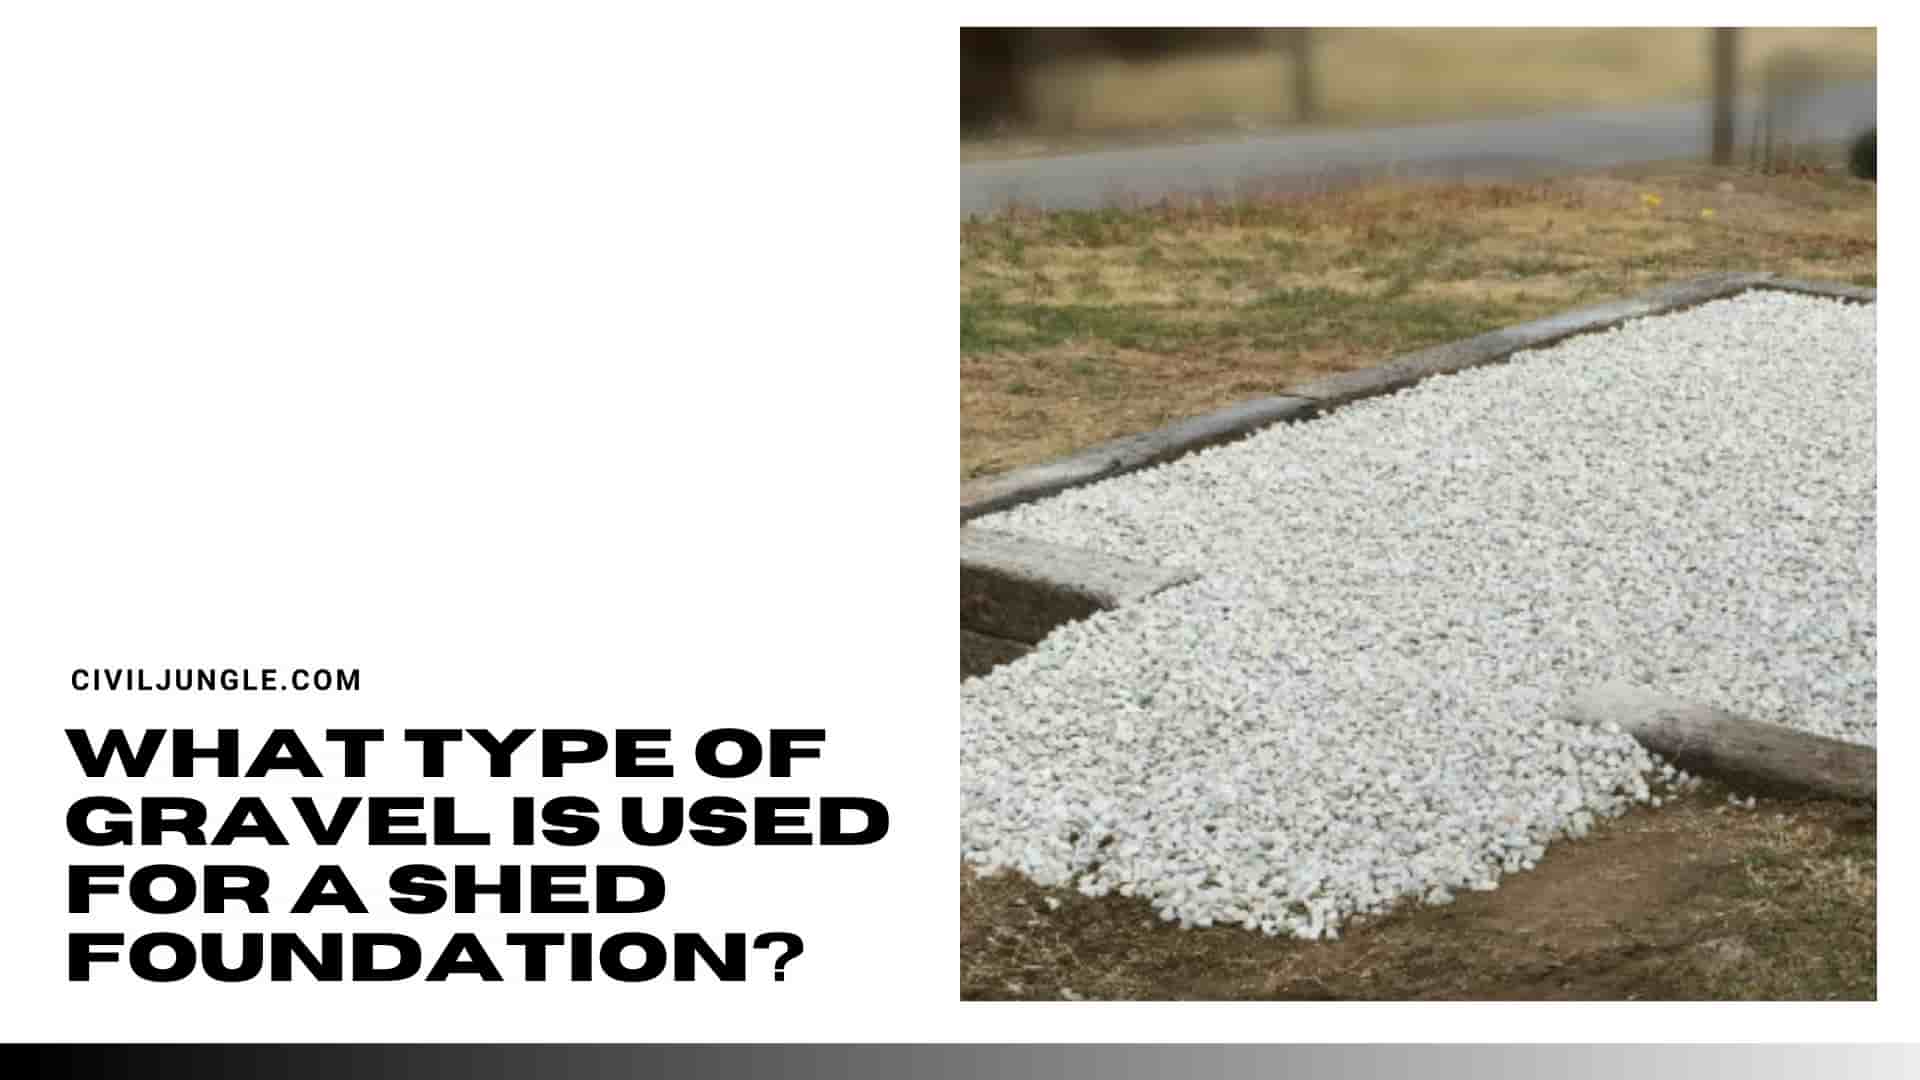 What Type of Gravel Is Used for a Shed Foundation?